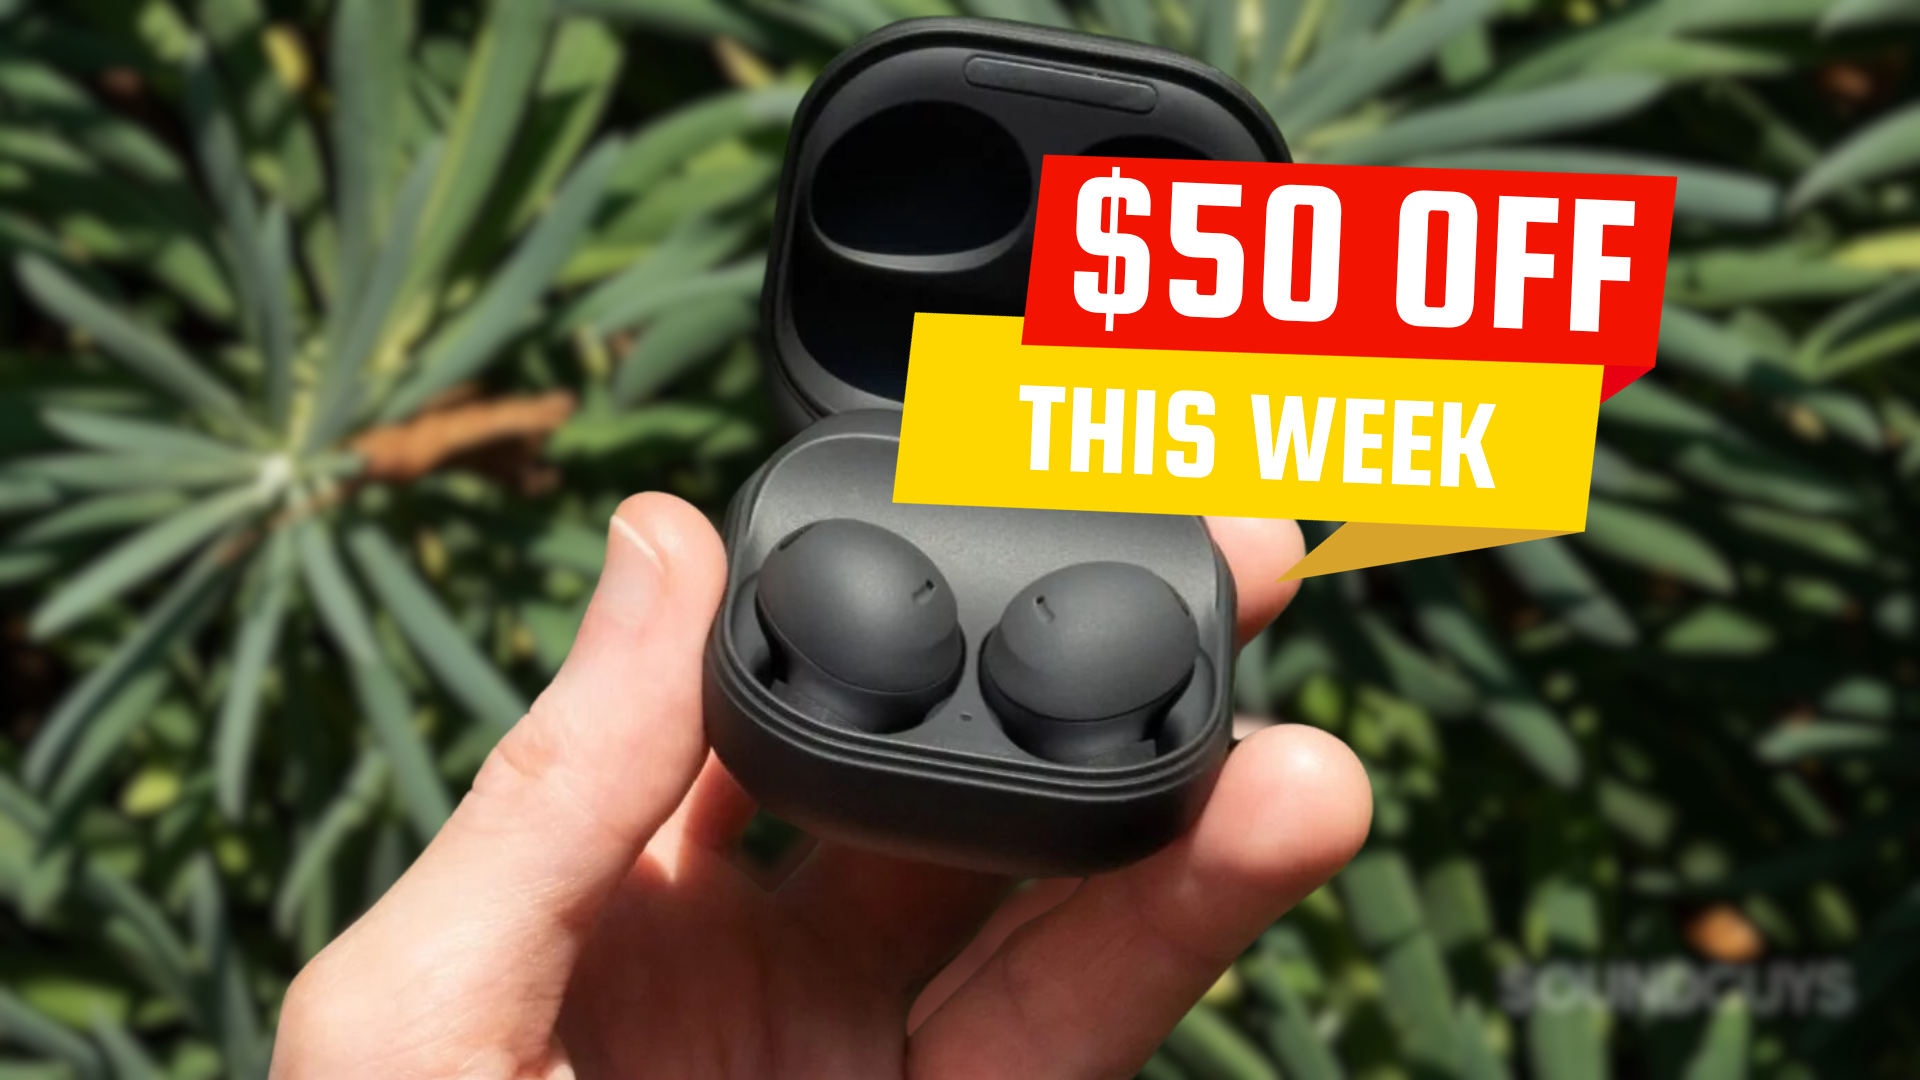 The Samsung Galaxy Buds 2 Pro are a steal this week